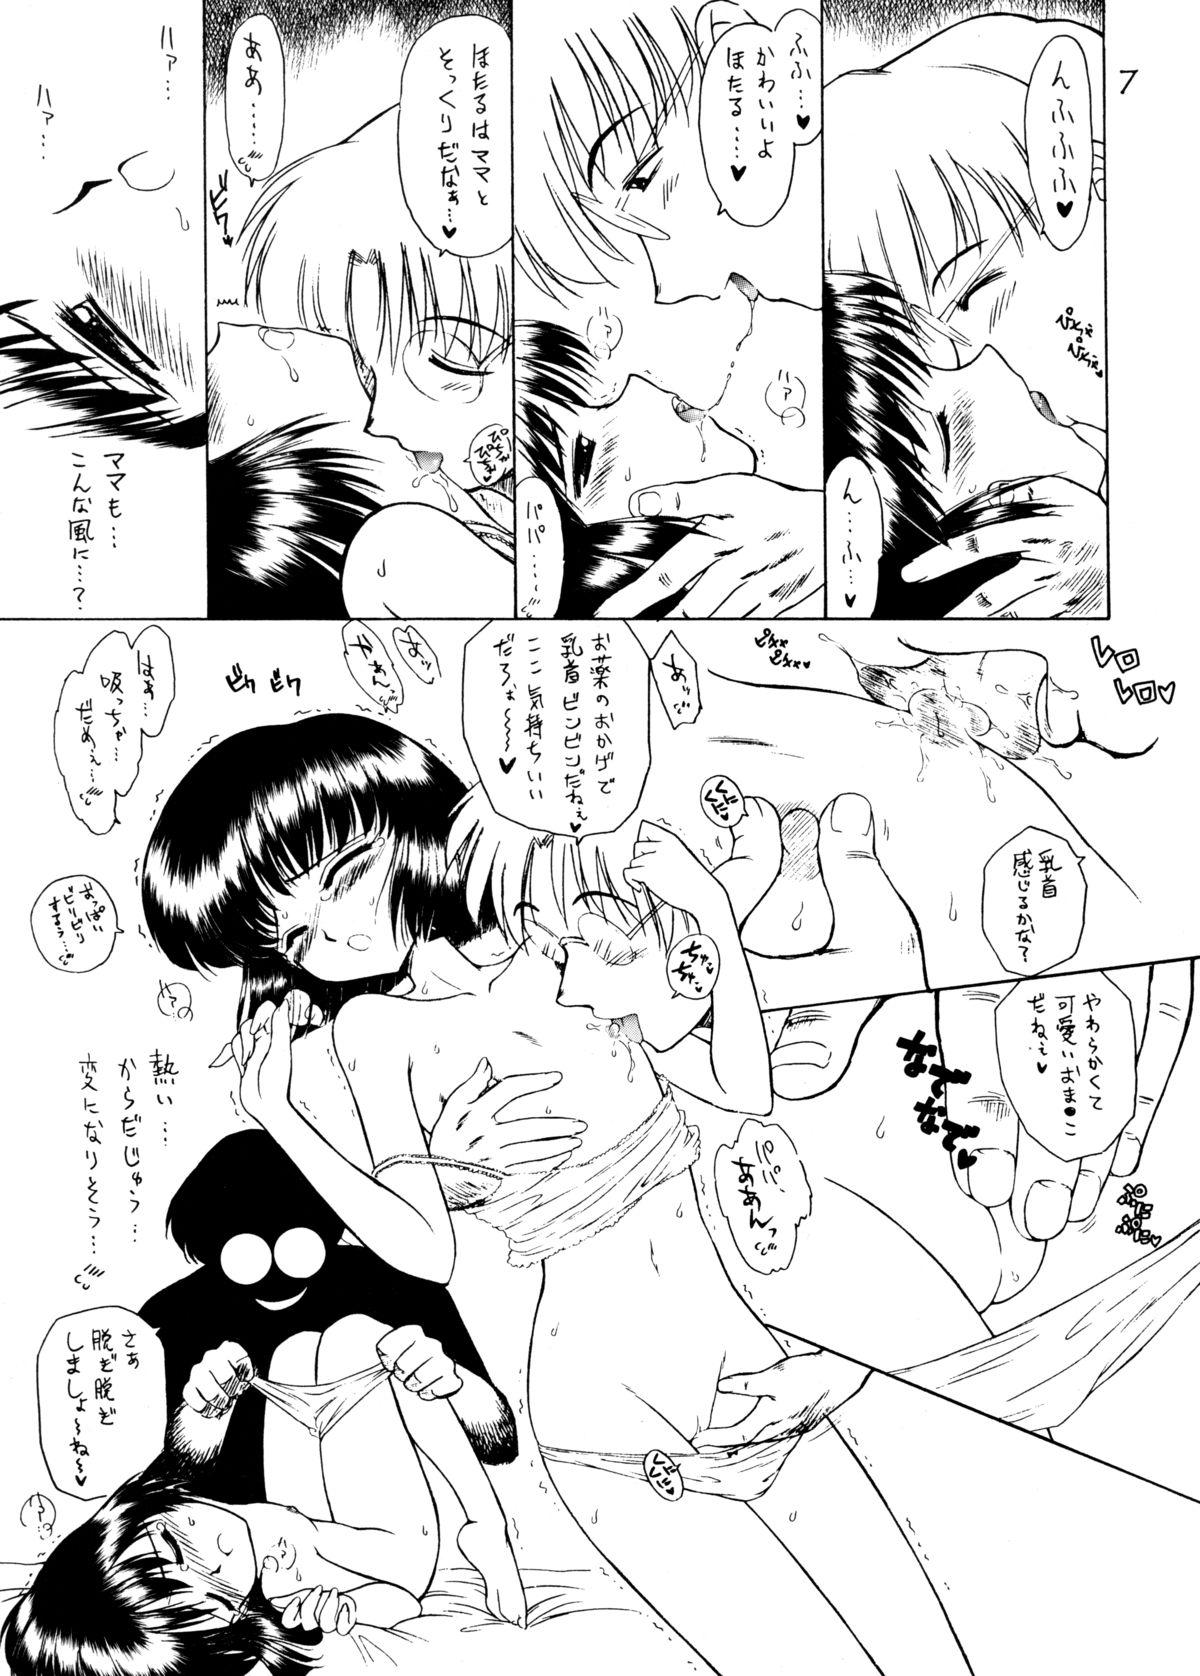 Lesbo Atom Heart Father - Sailor moon Three Some - Page 6